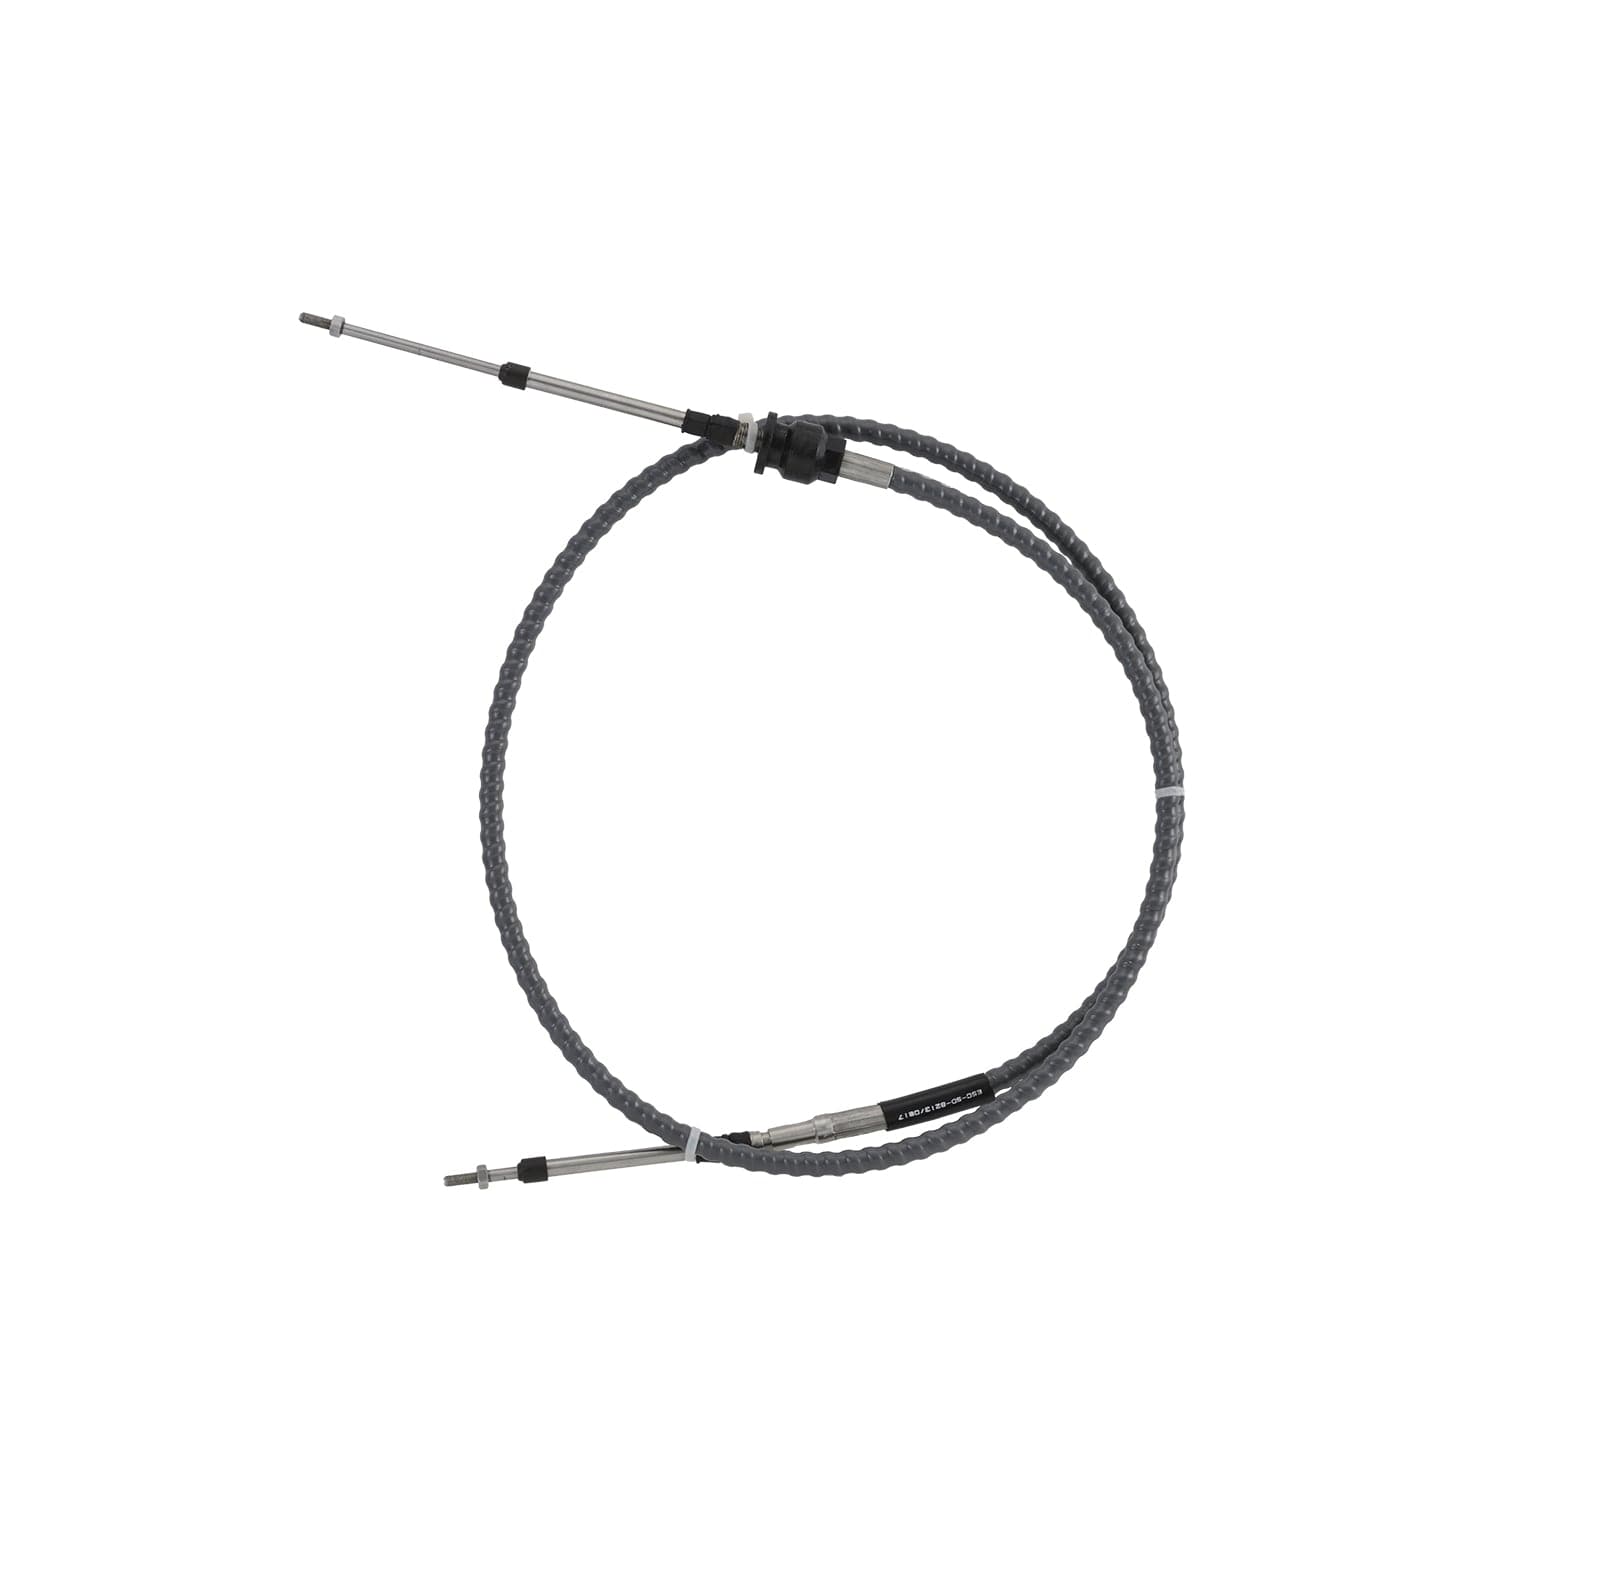 SBT Steering Cable for Sea-Doo Steering Cable for Sea-Doo GTI 130/ GTI 4-TEC/ GTI LE RFI/ GTX/ RXP/ WAKE 155